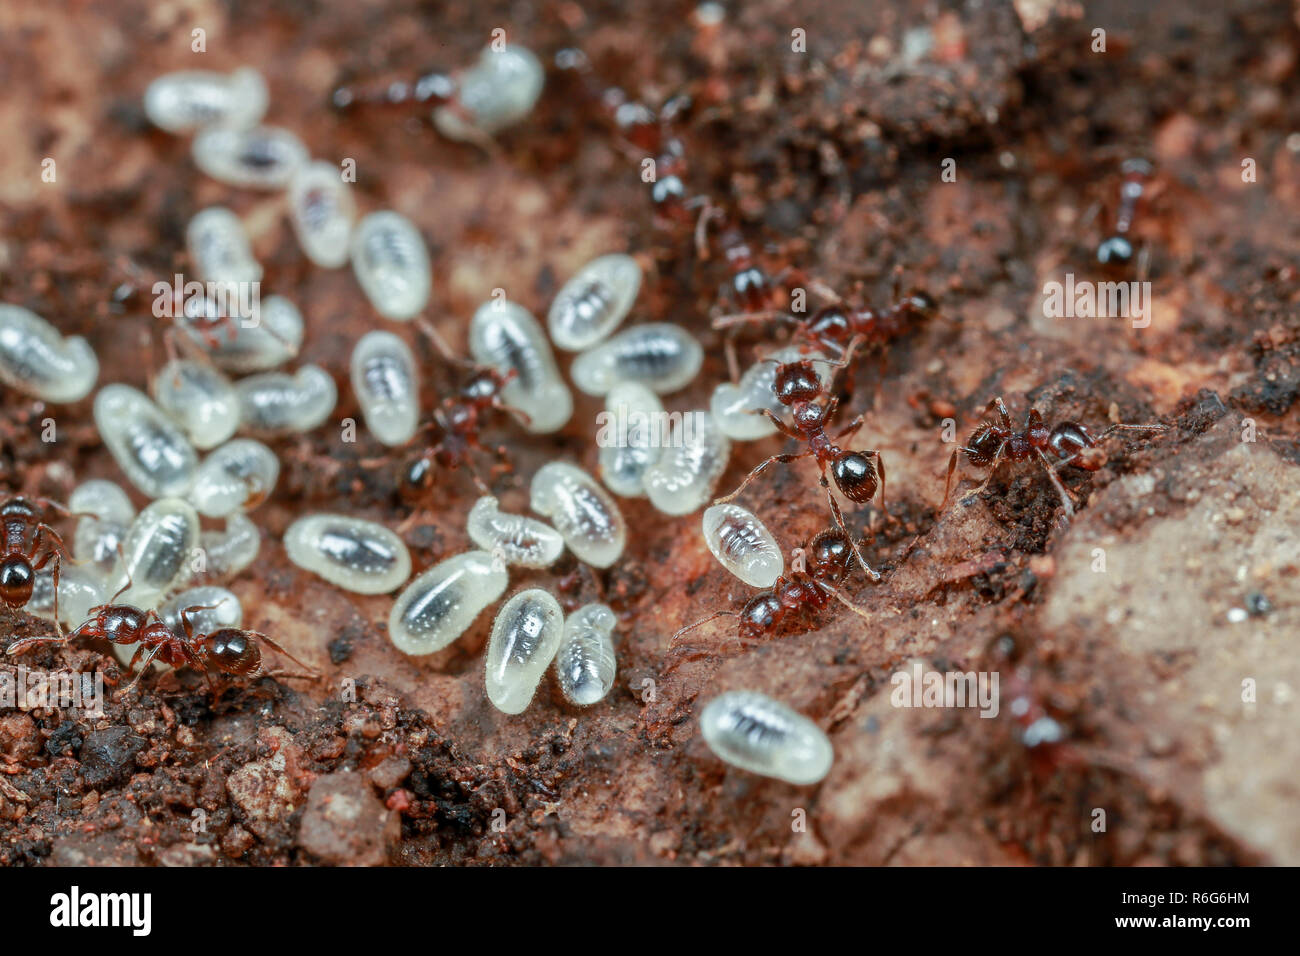 Workers, pupae and larvae inside a pheidole ant nest in Australia Stock Photo